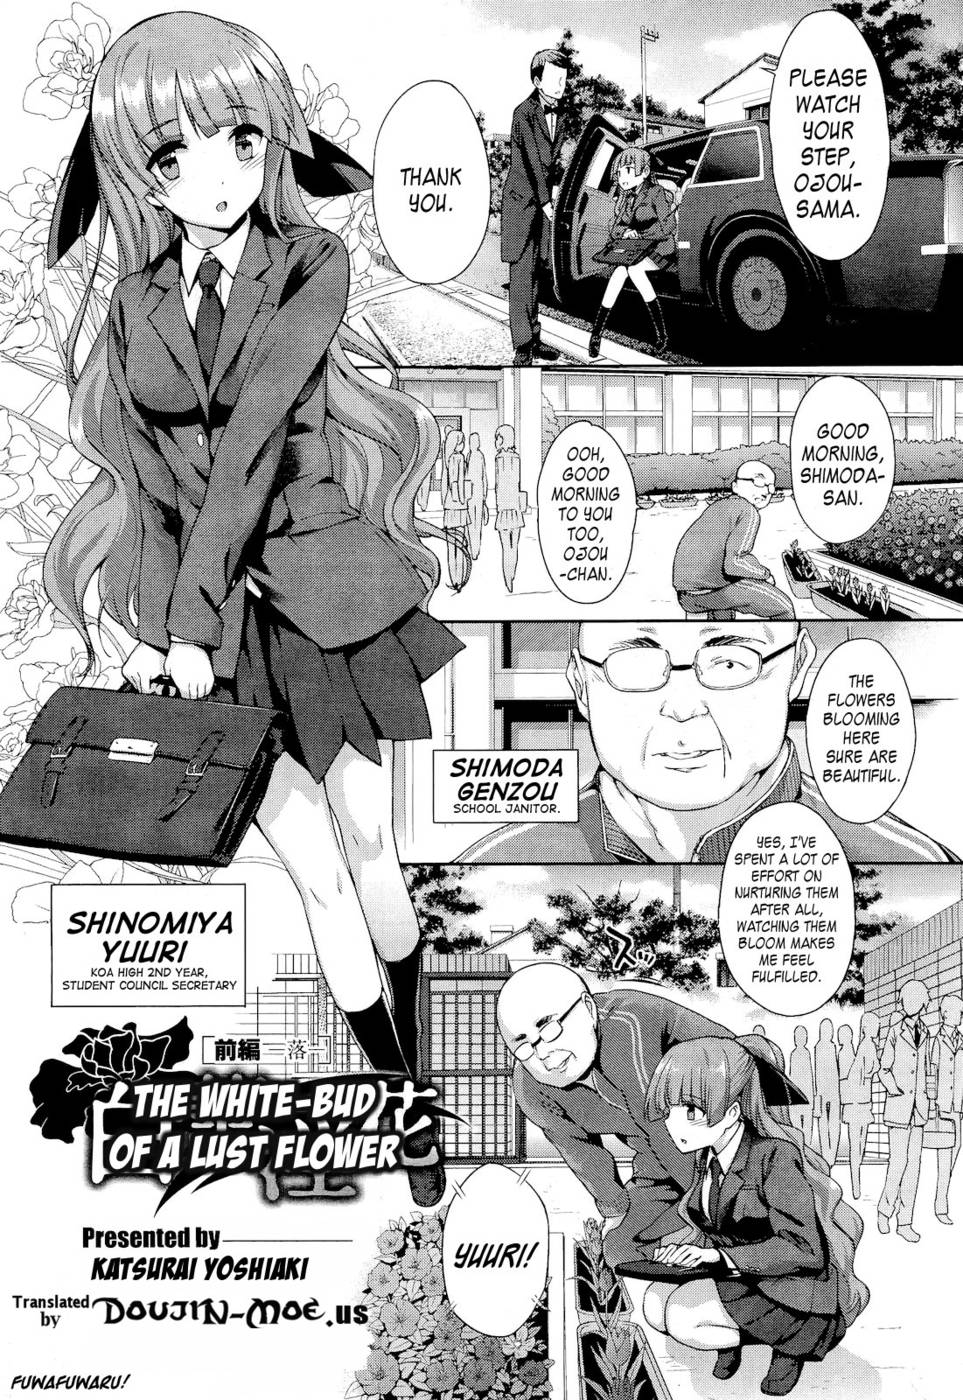 Hentai Manga Comic-The White-Bud of a Lust Flower-Chapter 1-1